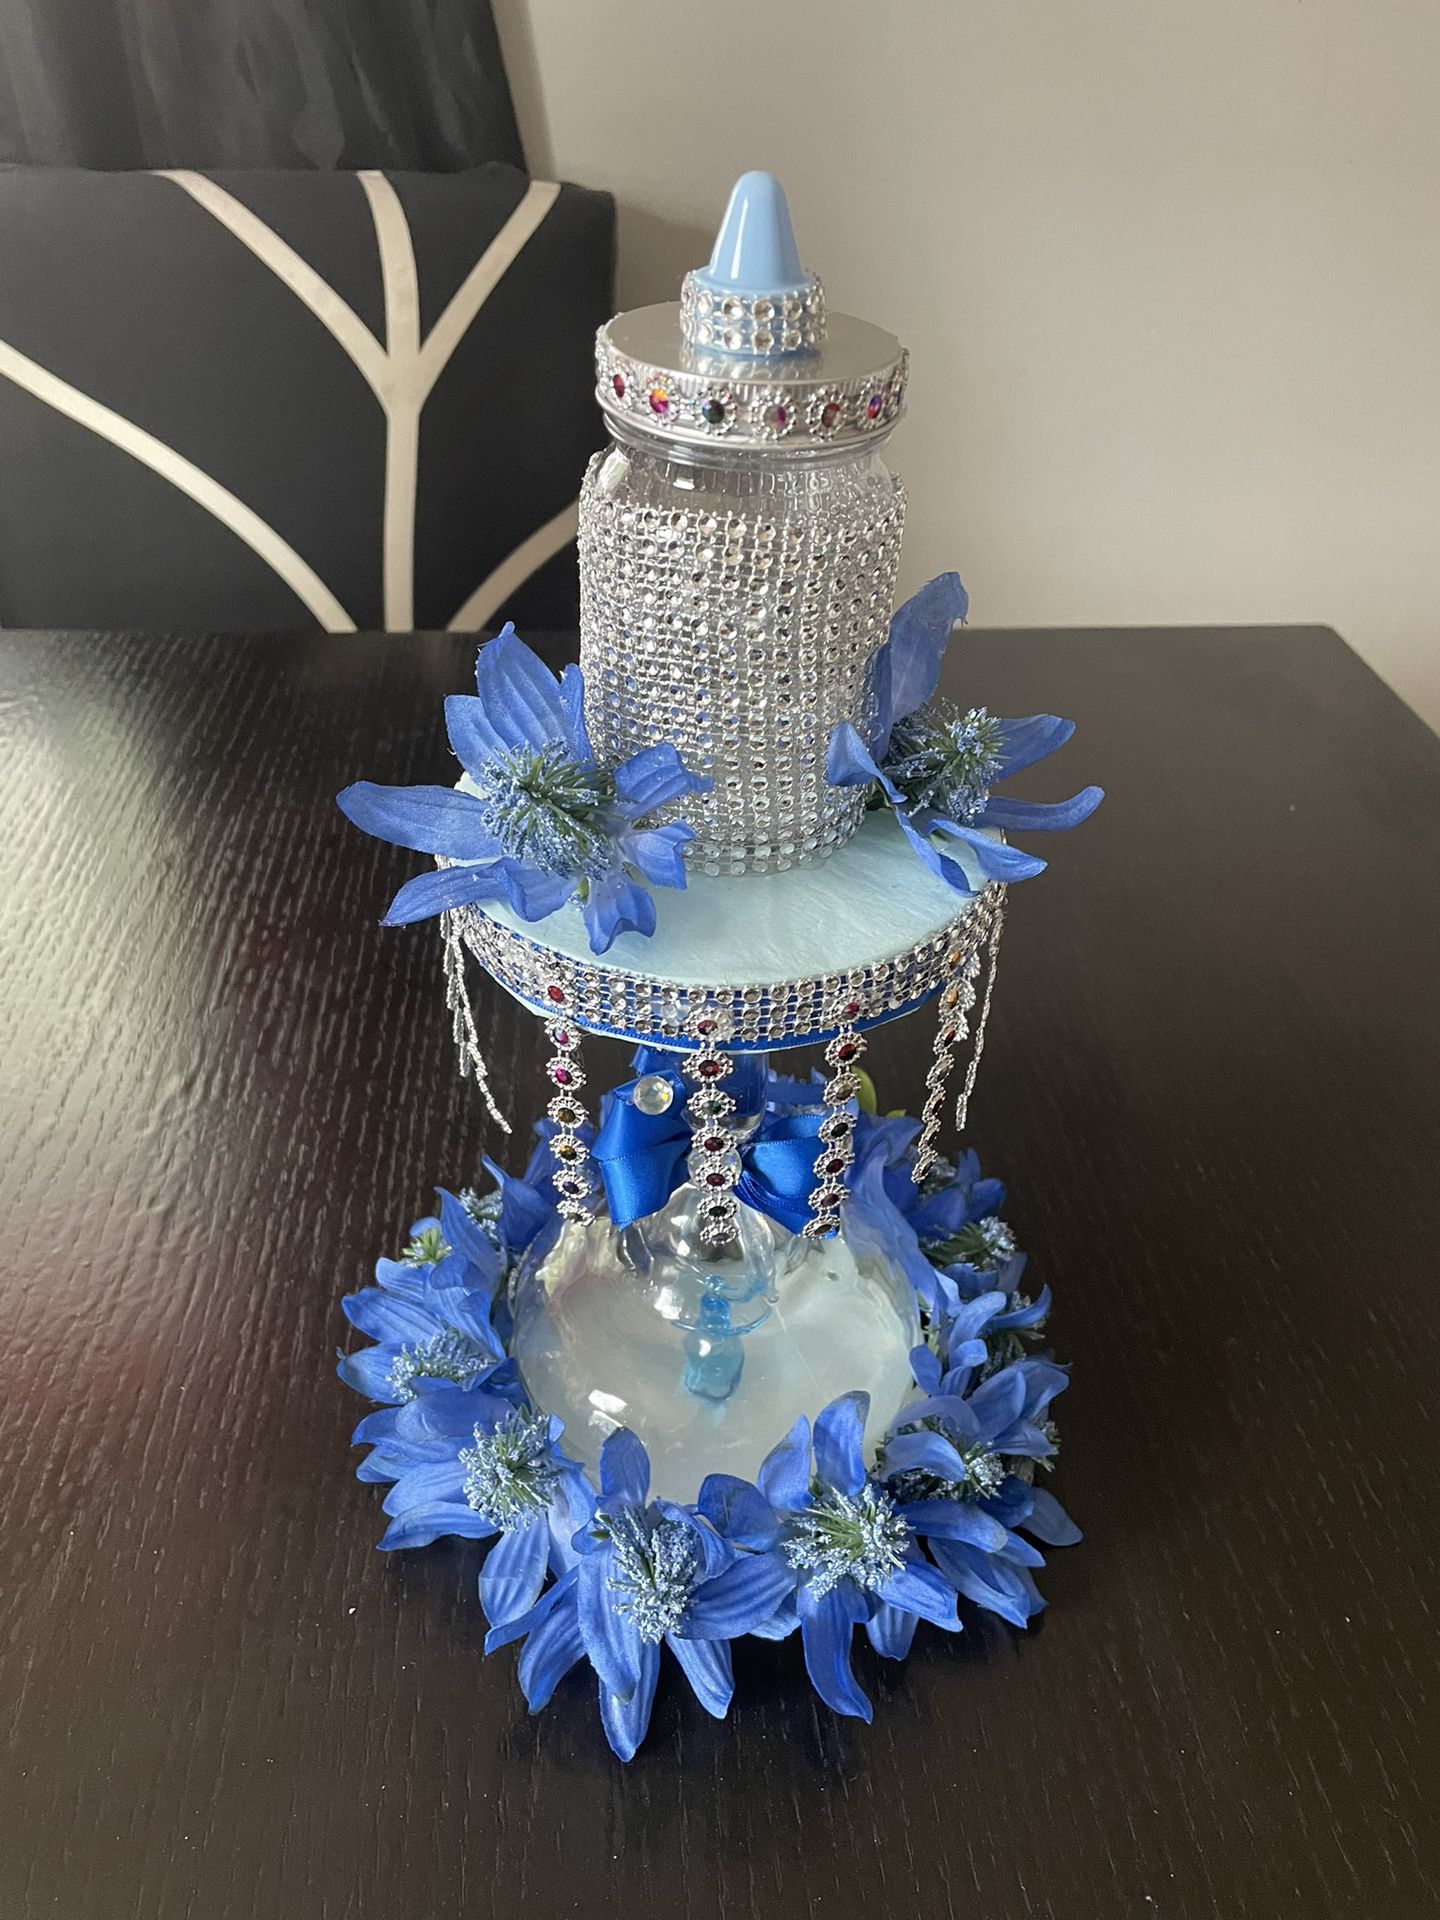 Baby Shower Centerpieces For a Baby Boy